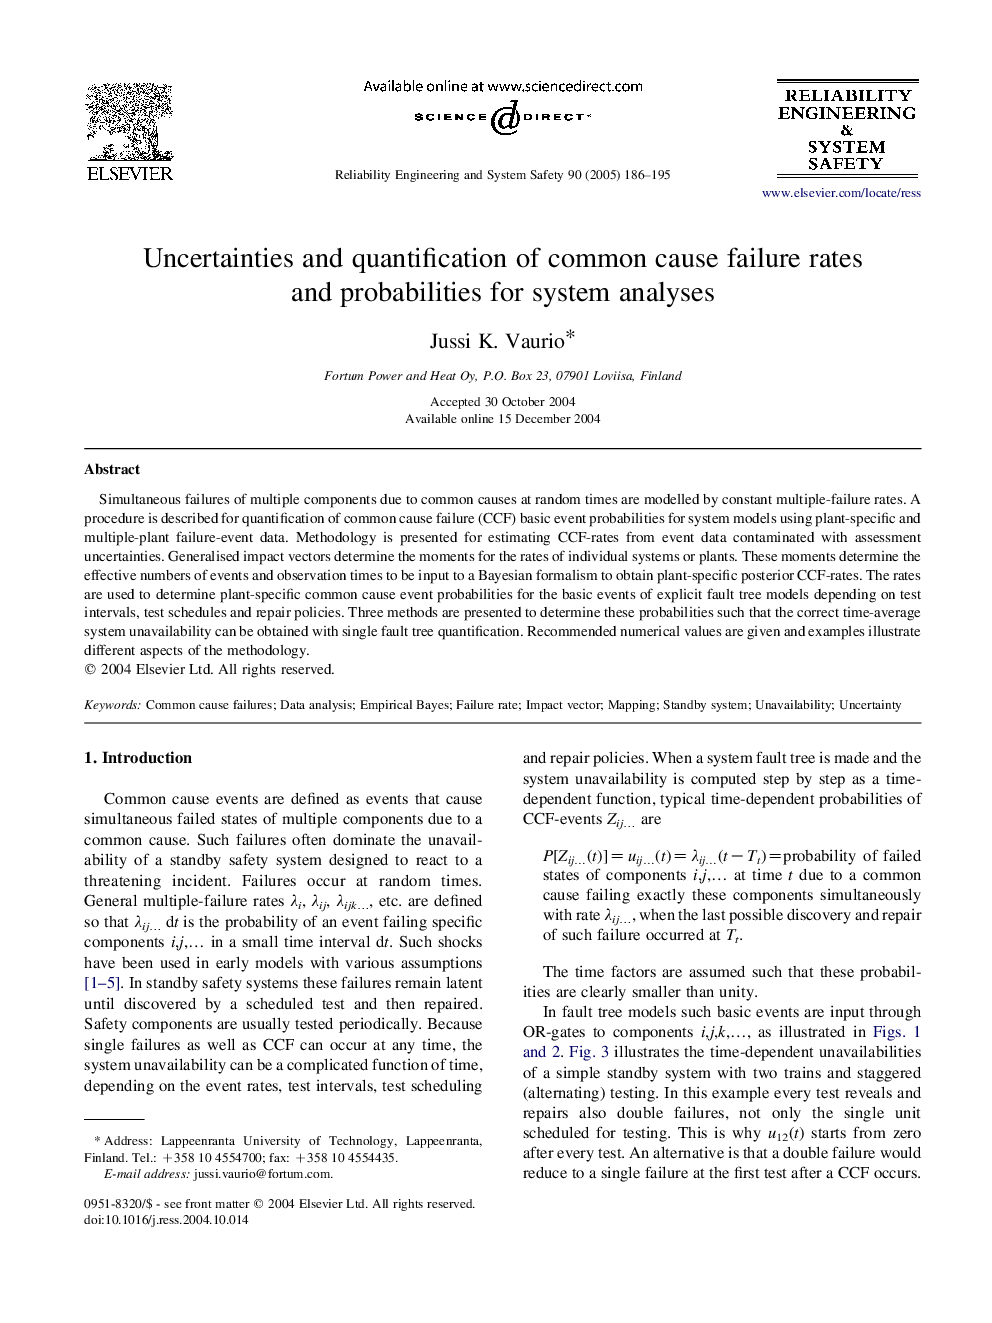 Uncertainties and quantification of common cause failure rates and probabilities for system analyses